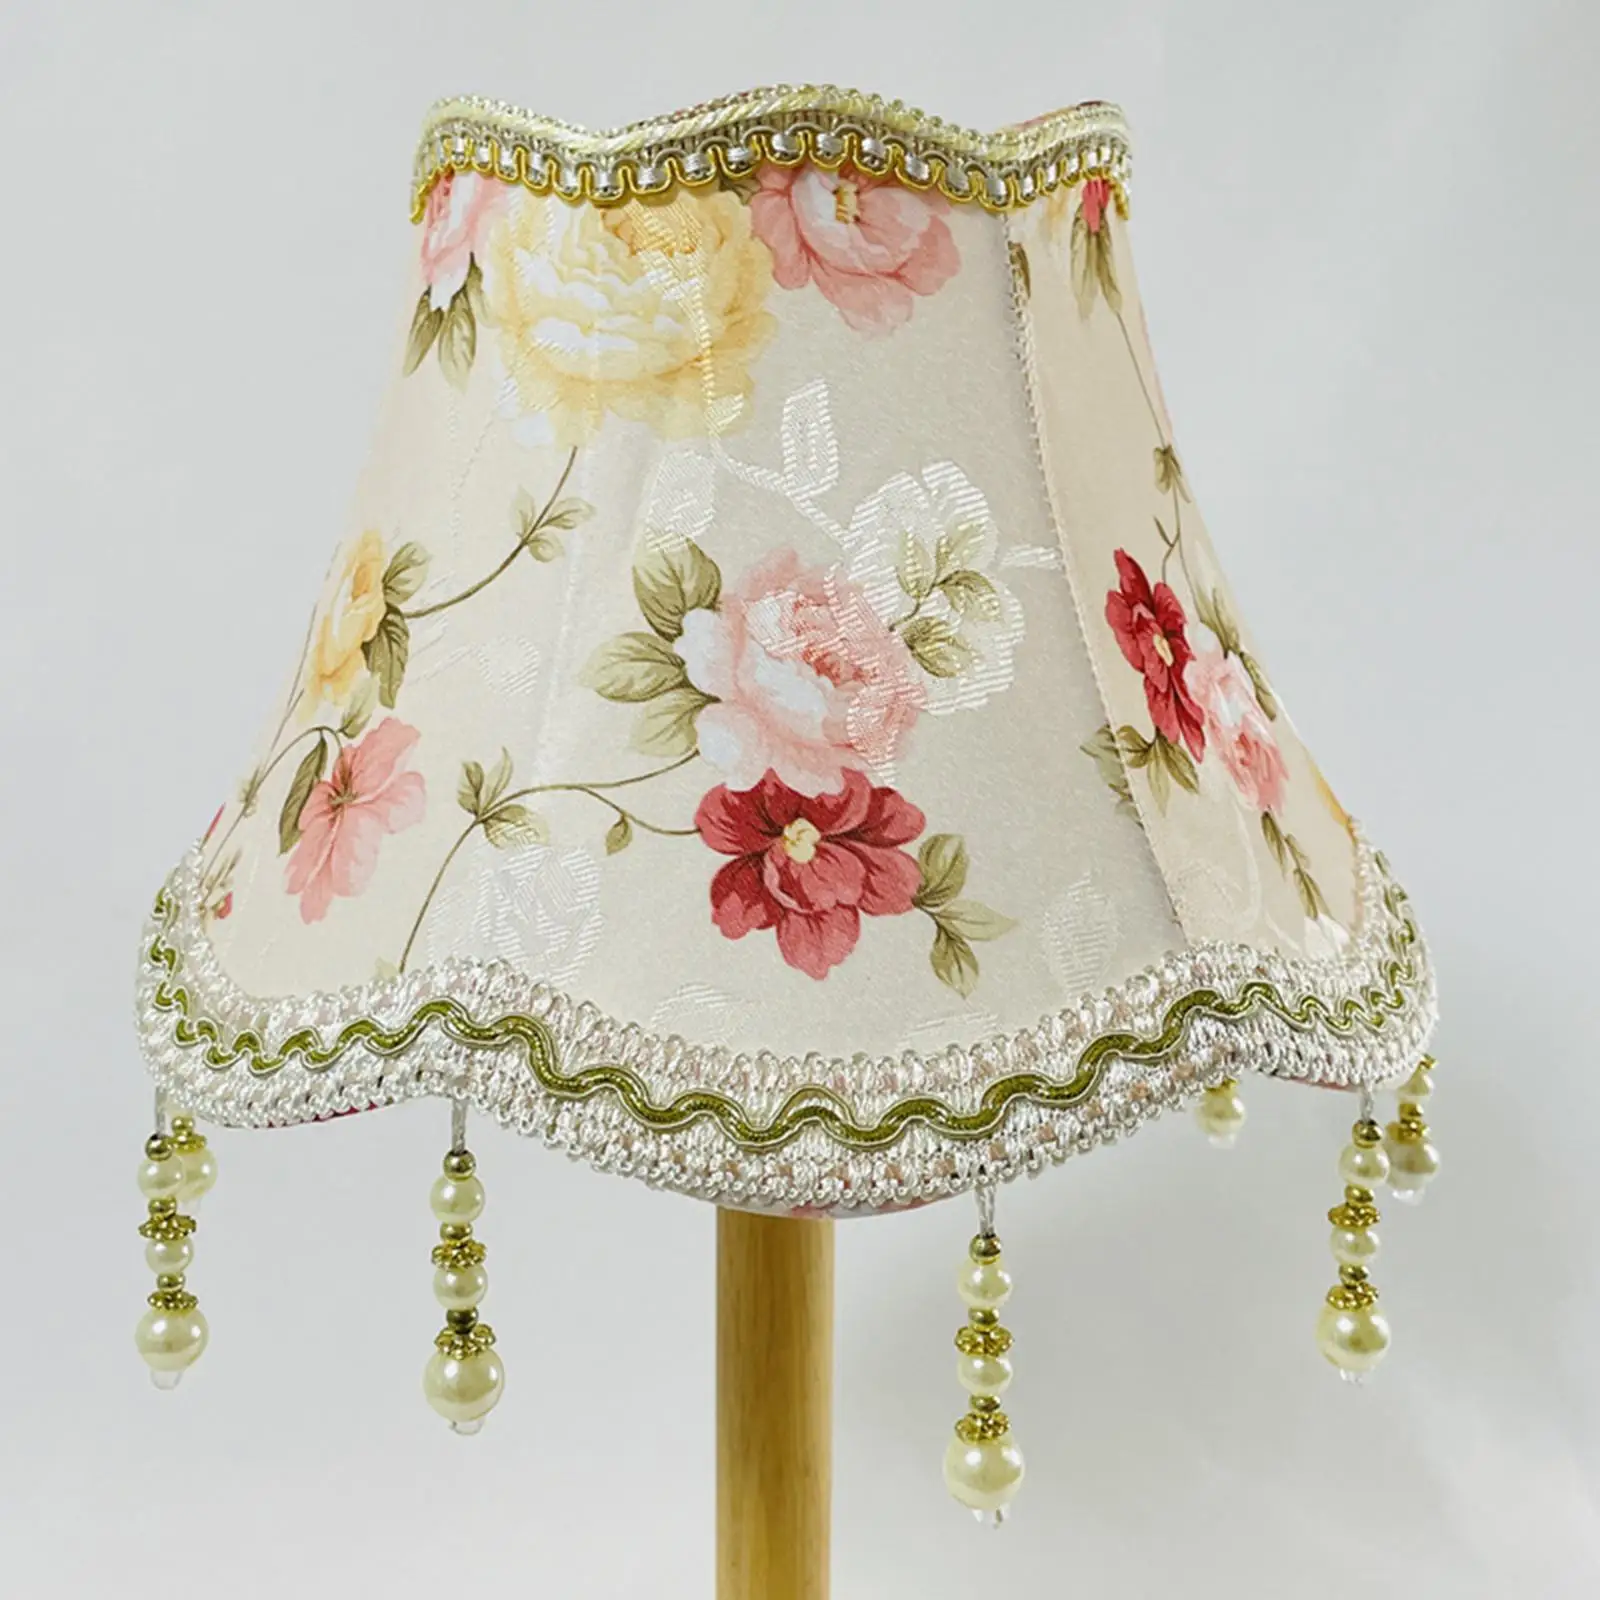 Fabric Lampshade Vintage Style Flower Pattern Lamp Shade with Fringe